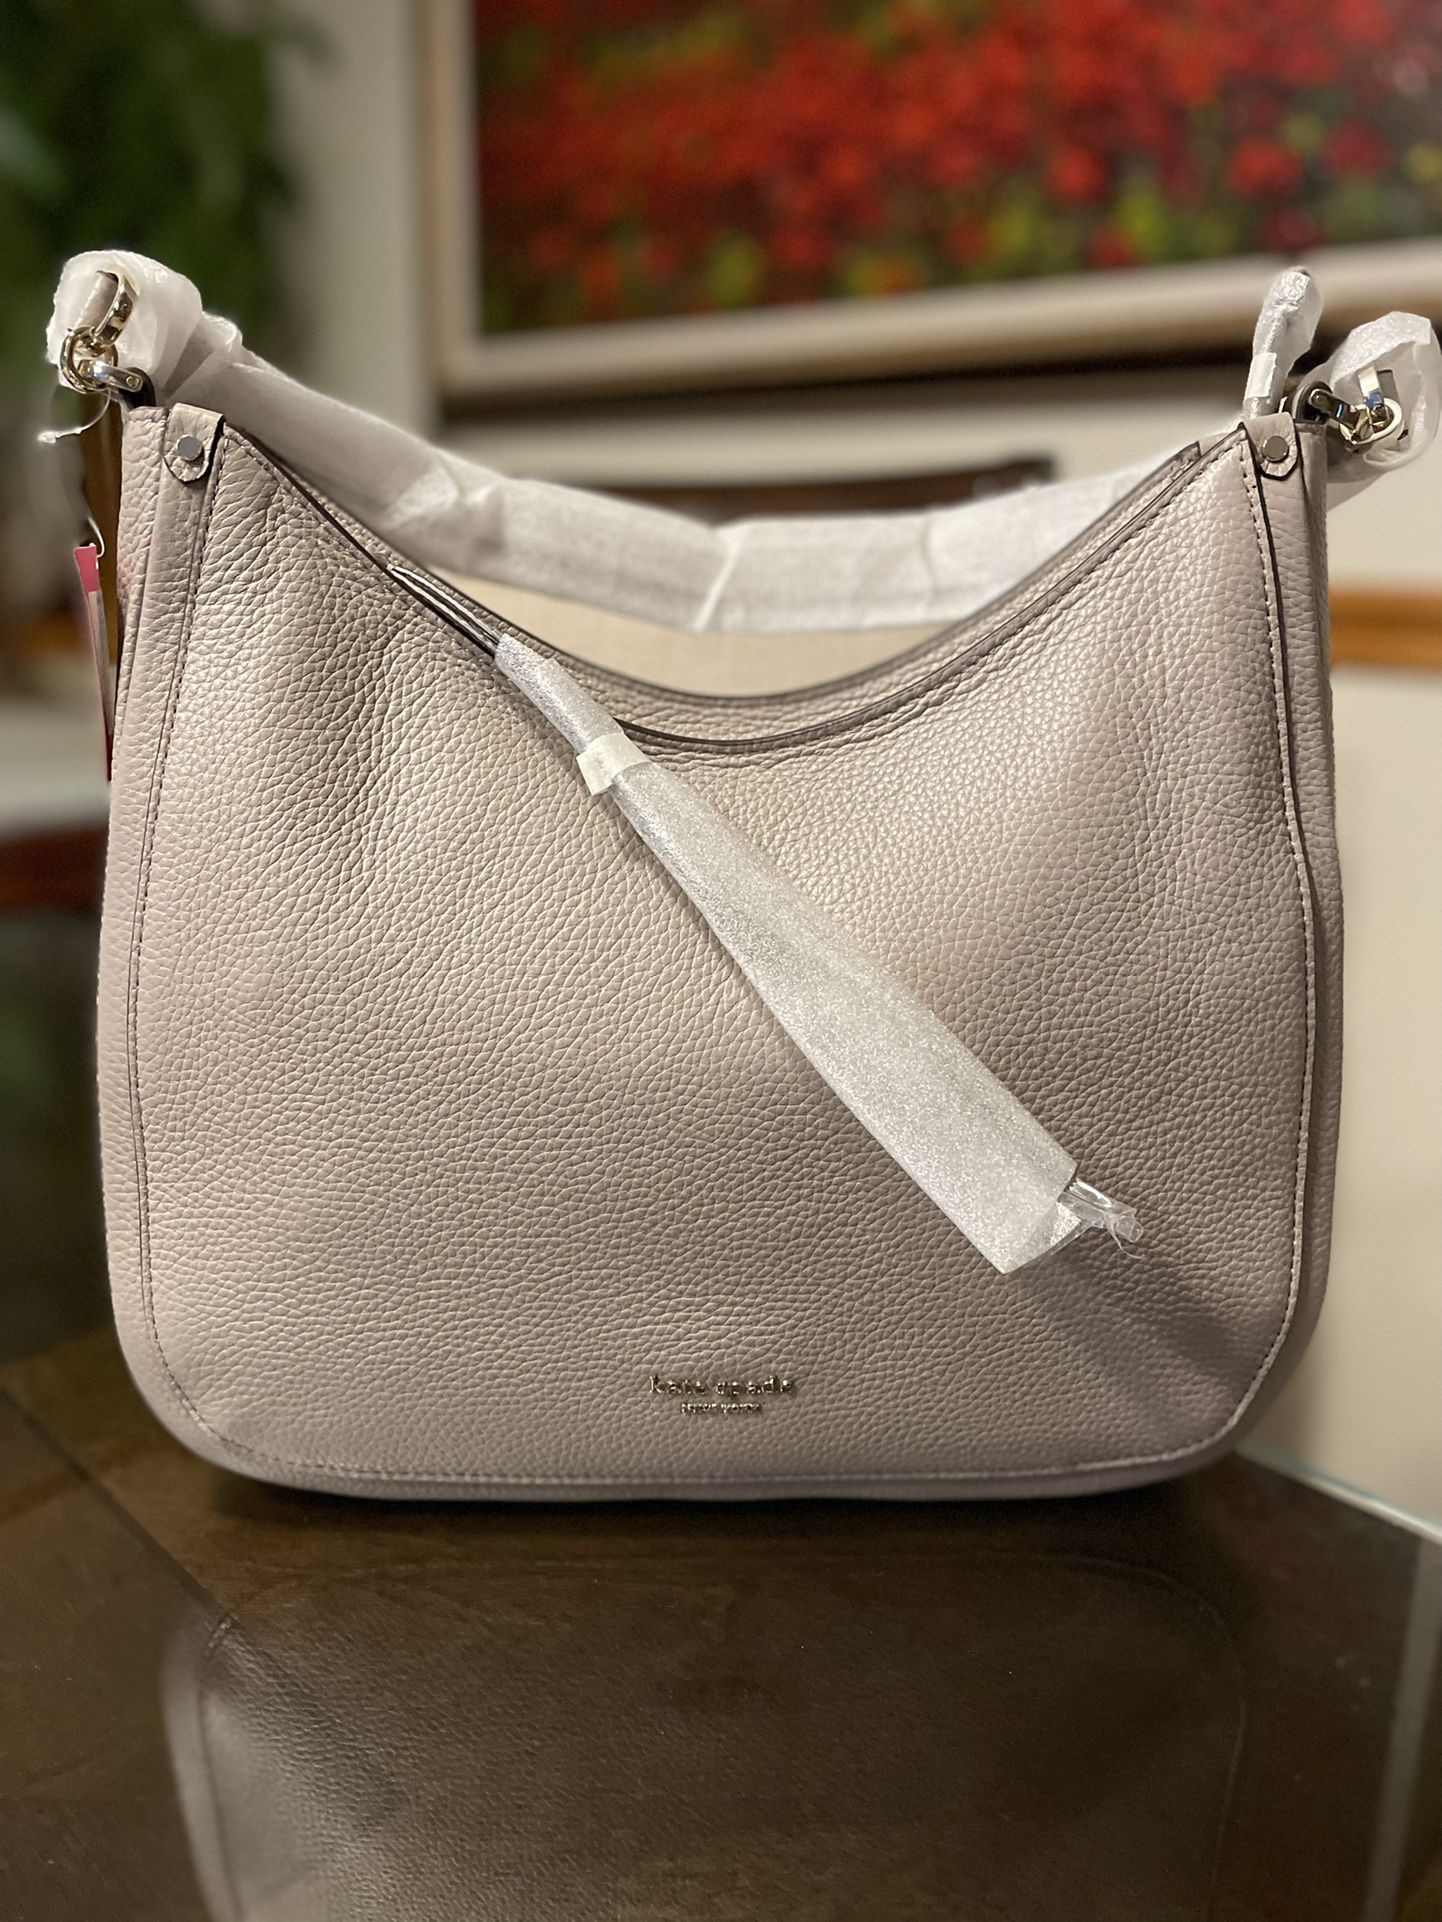 NEW-kate spade new york Warm Taupe Roulette Large Hobo Bag